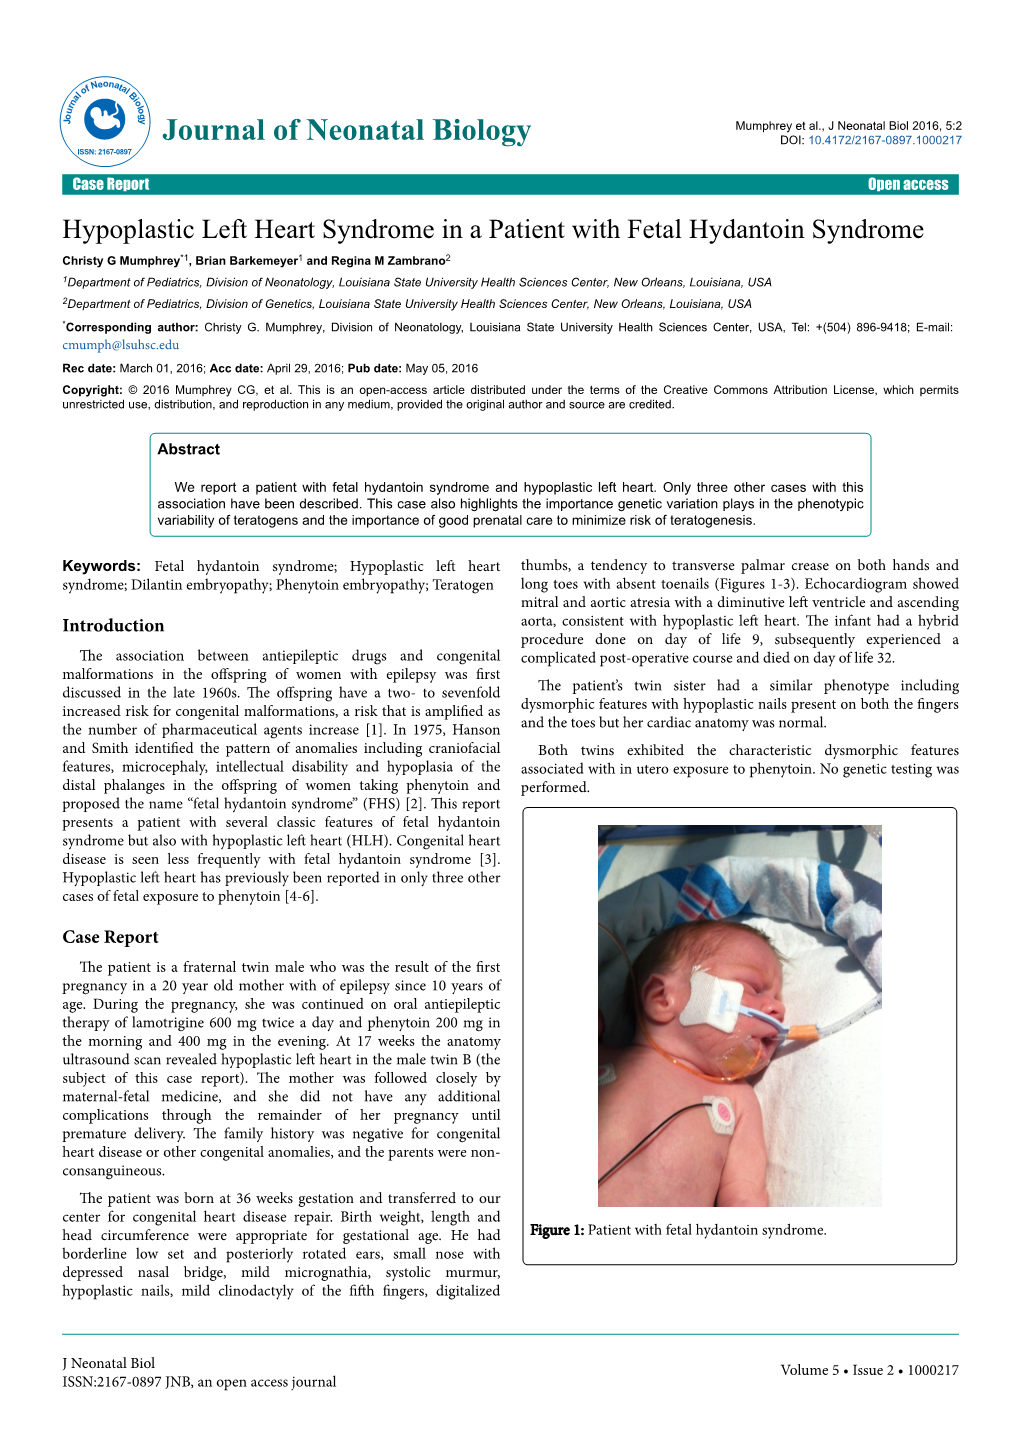 Hypoplastic Left Heart Syndrome in a Patient with Fetal Hydantoin Syndrome